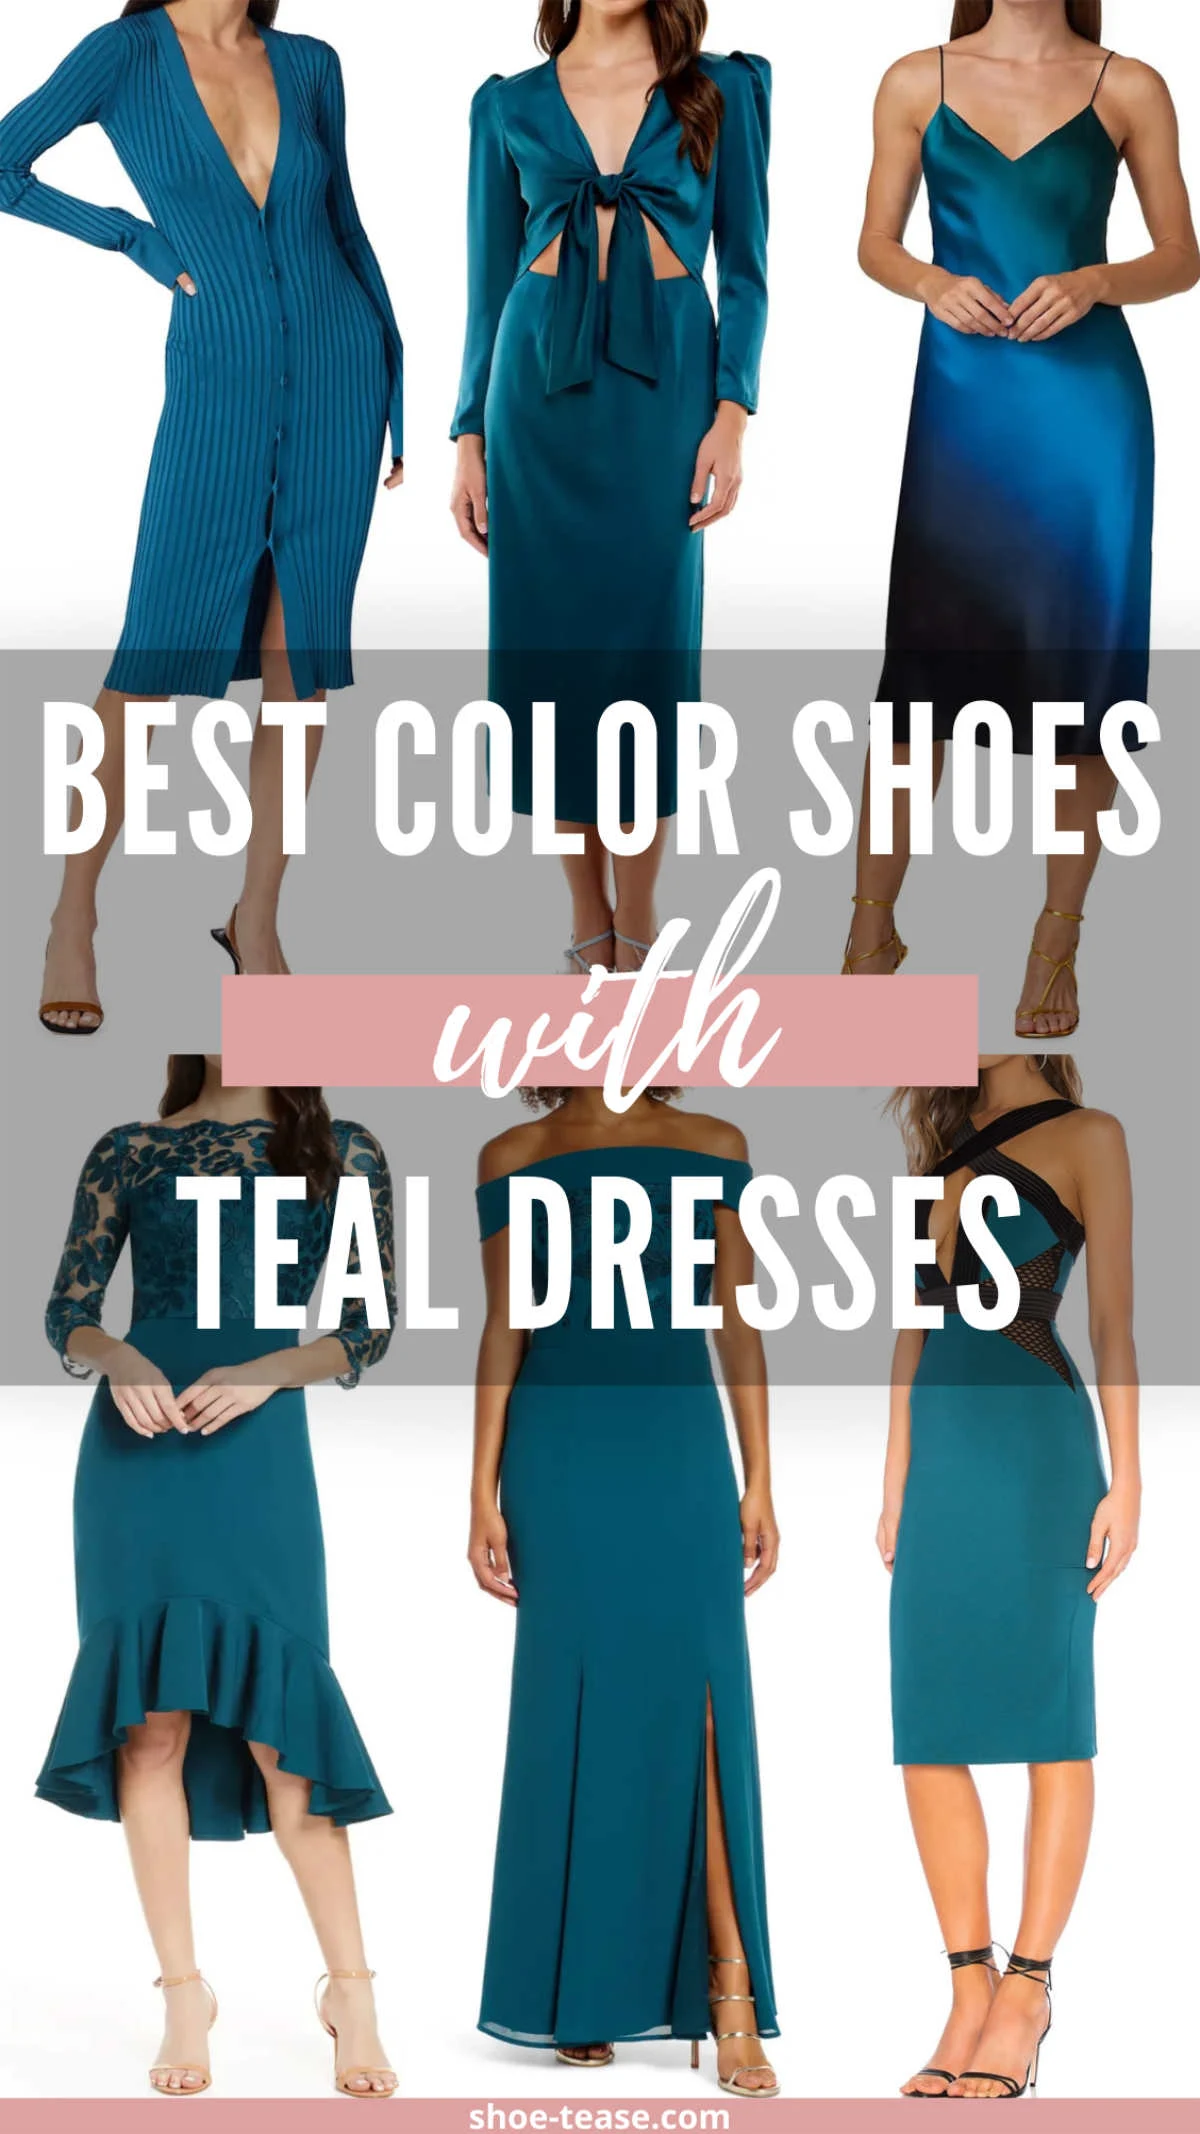 Best Color Shoes to Wear with Teal Dresses PINsm.jpg